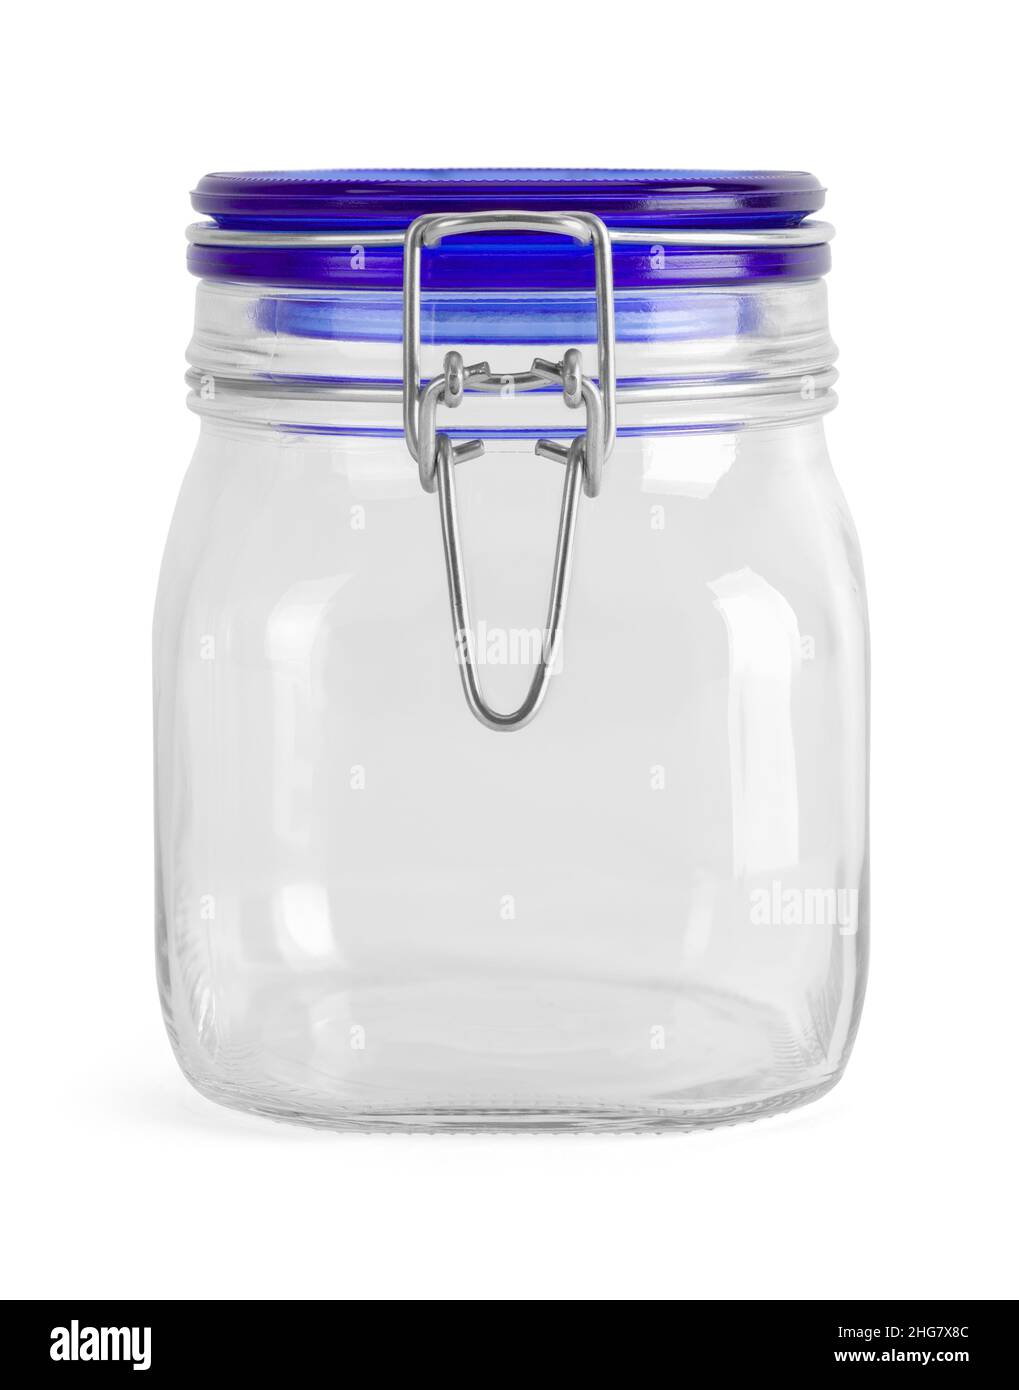 Small Glass Jar with Locking Lid Seal Cut Out. Stock Photo